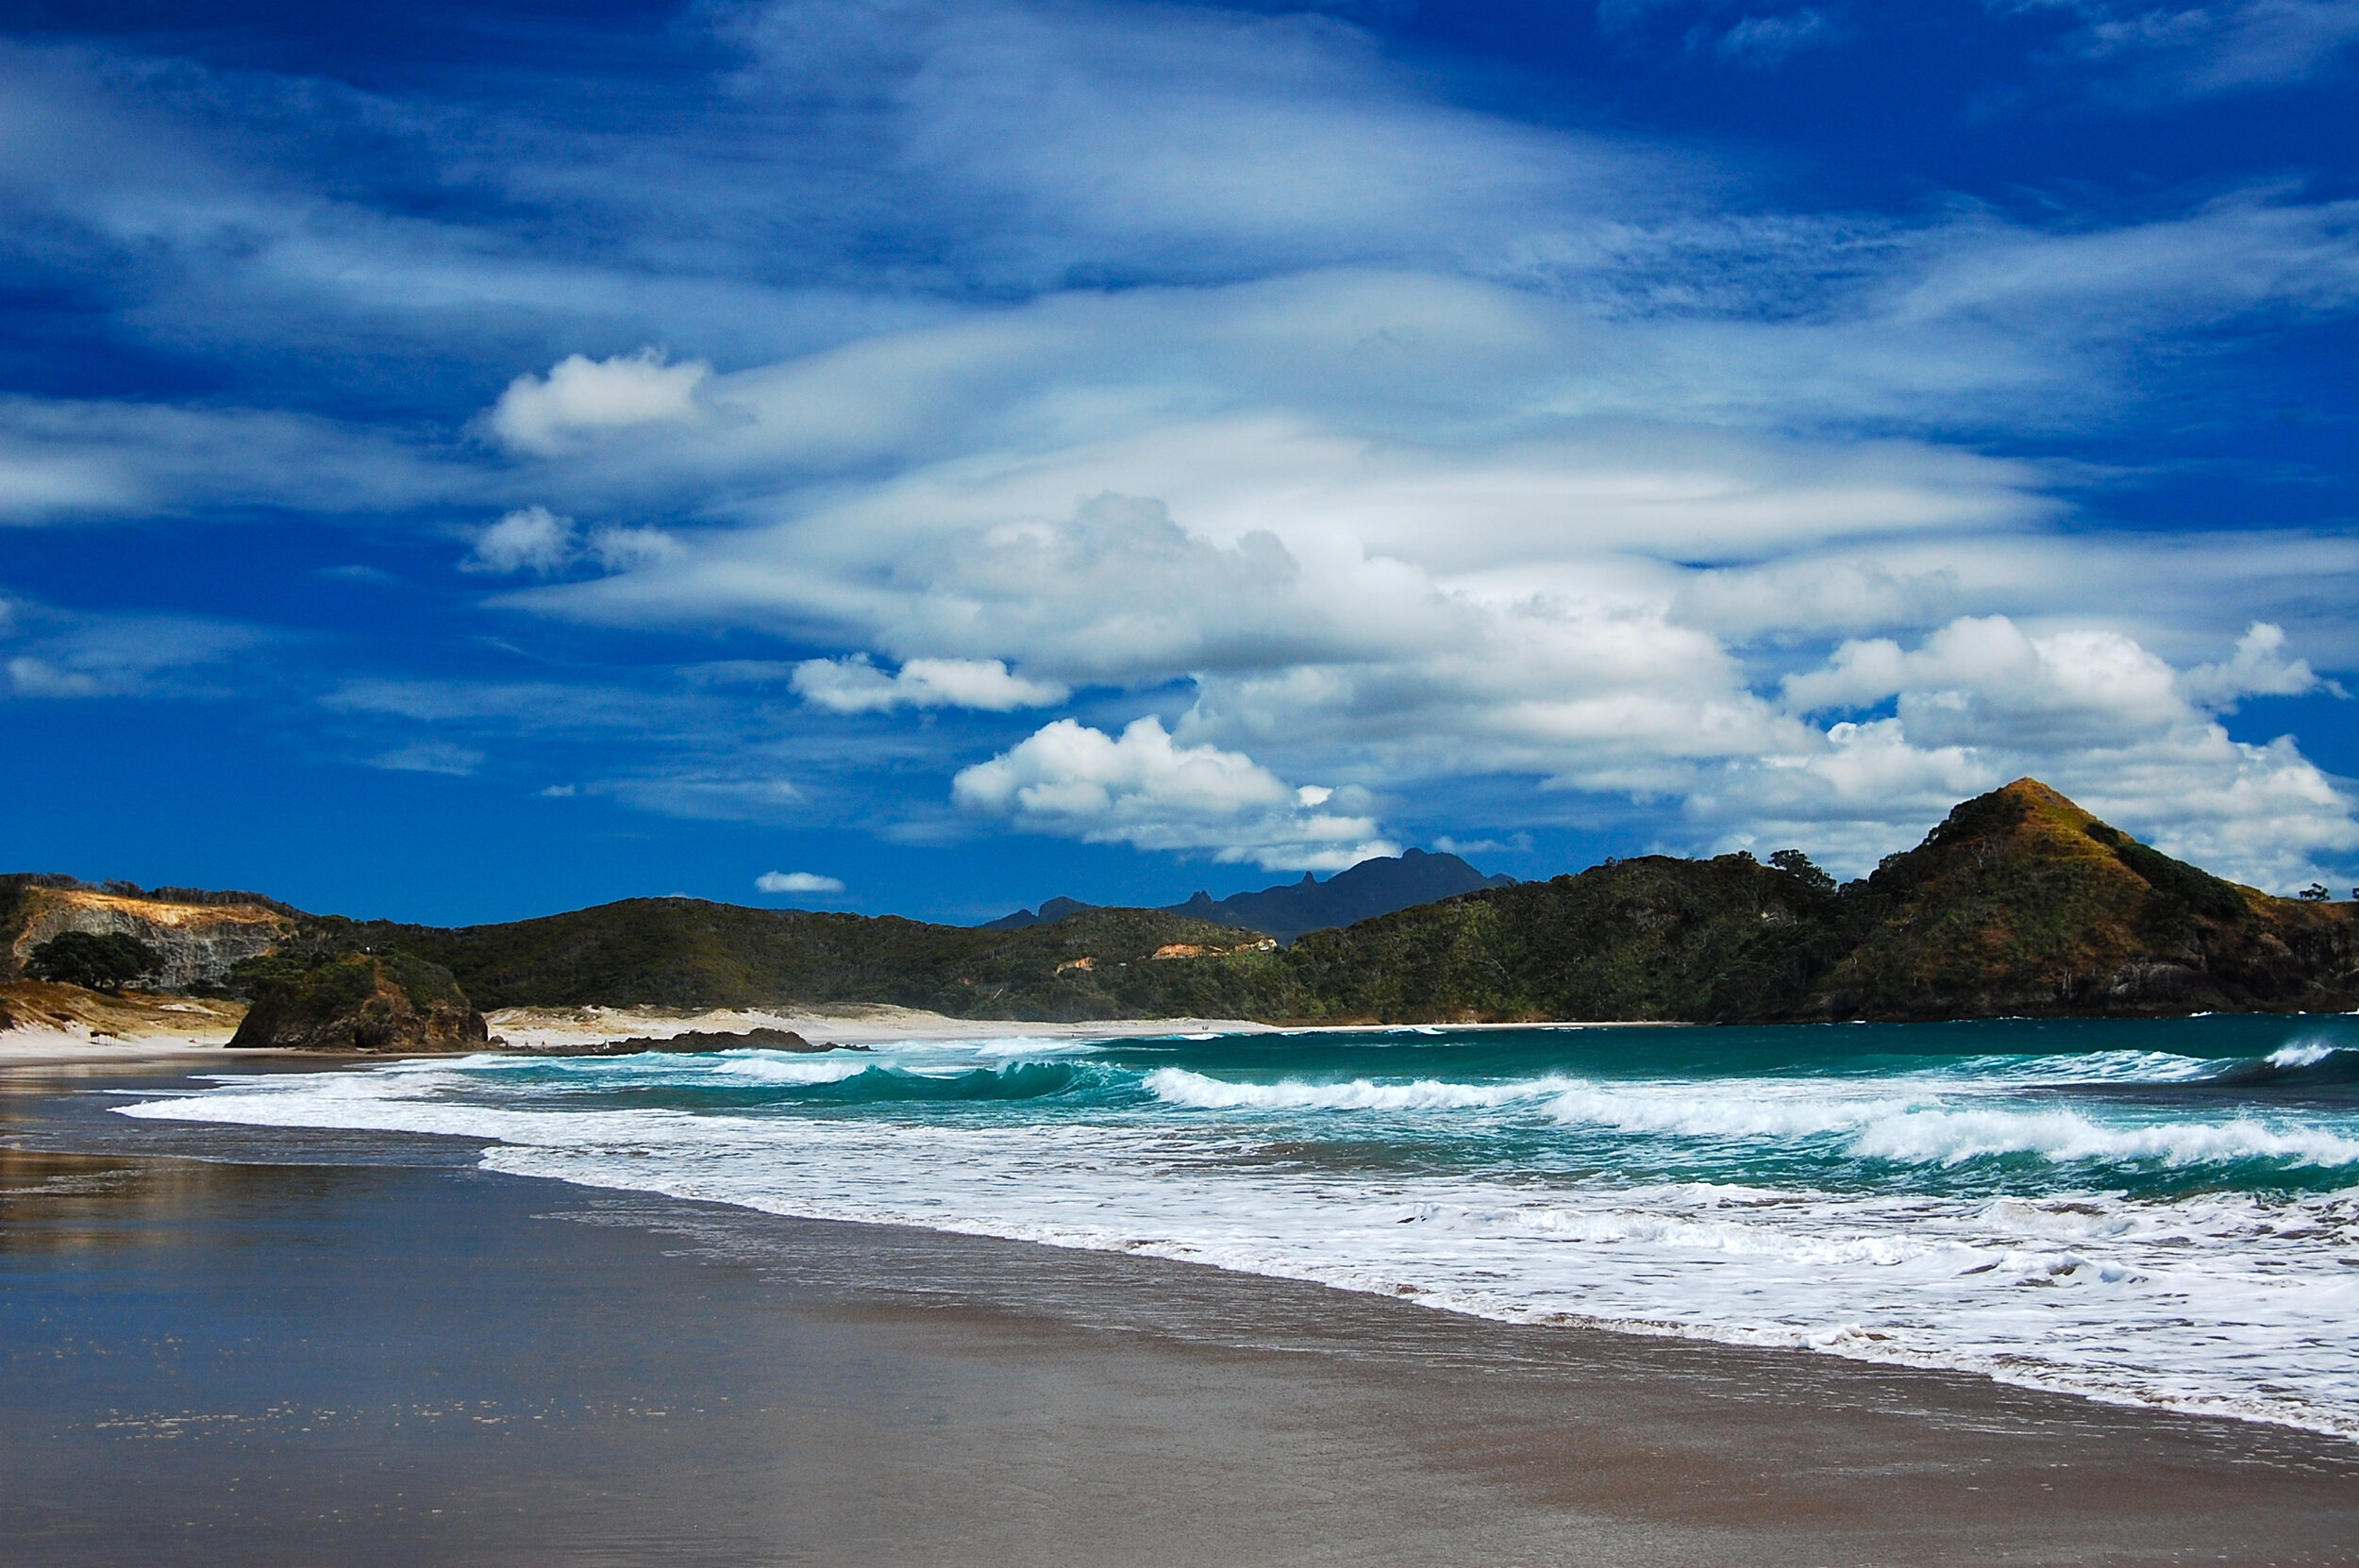 BEST THINGS TO SEE AND DO ON GREAT BARRIER ISLAND